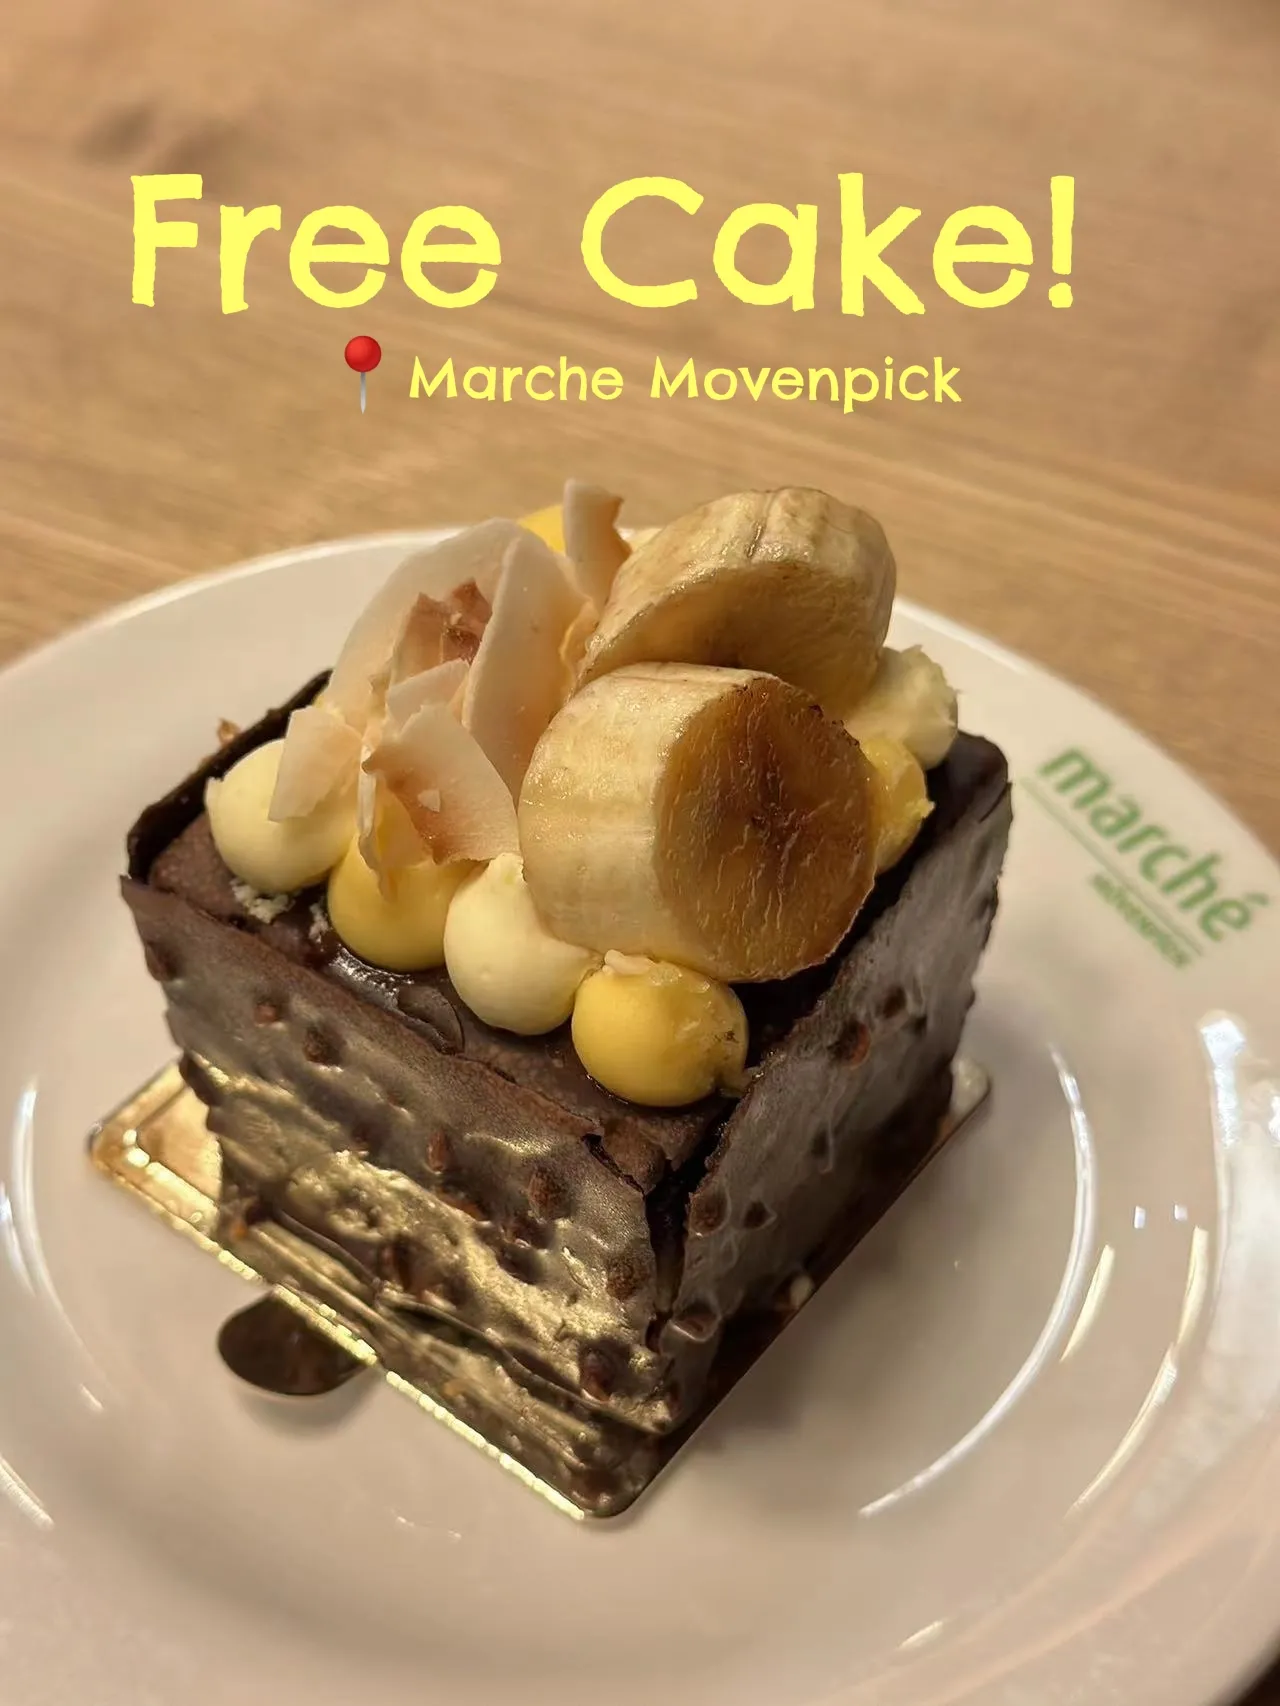 Birthday deals: Free cake without any purchase! 's images